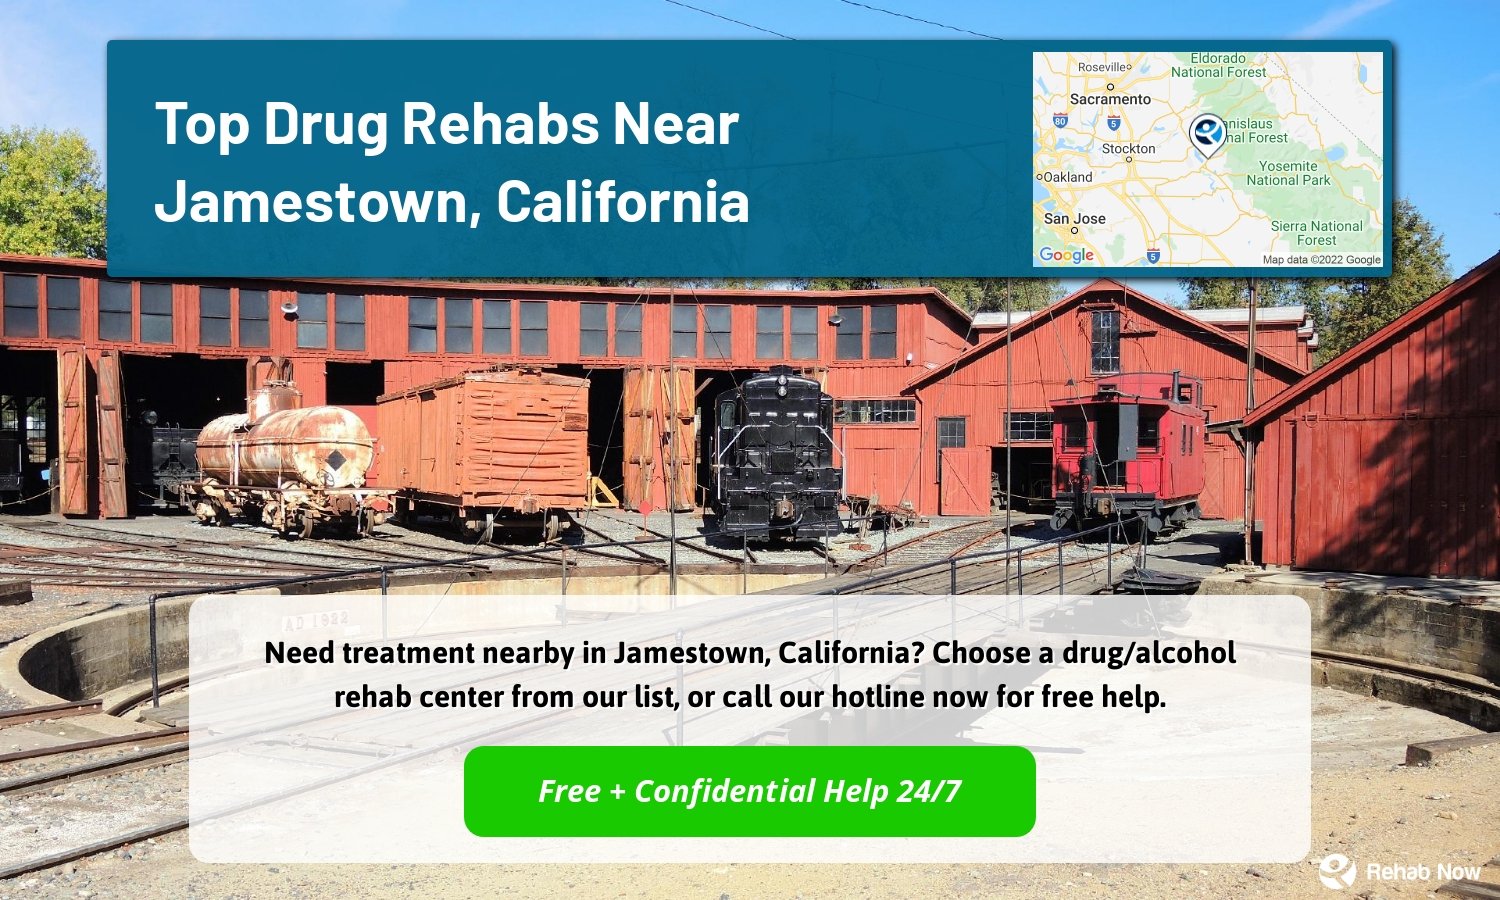 Need treatment nearby in Jamestown, California? Choose a drug/alcohol rehab center from our list, or call our hotline now for free help.